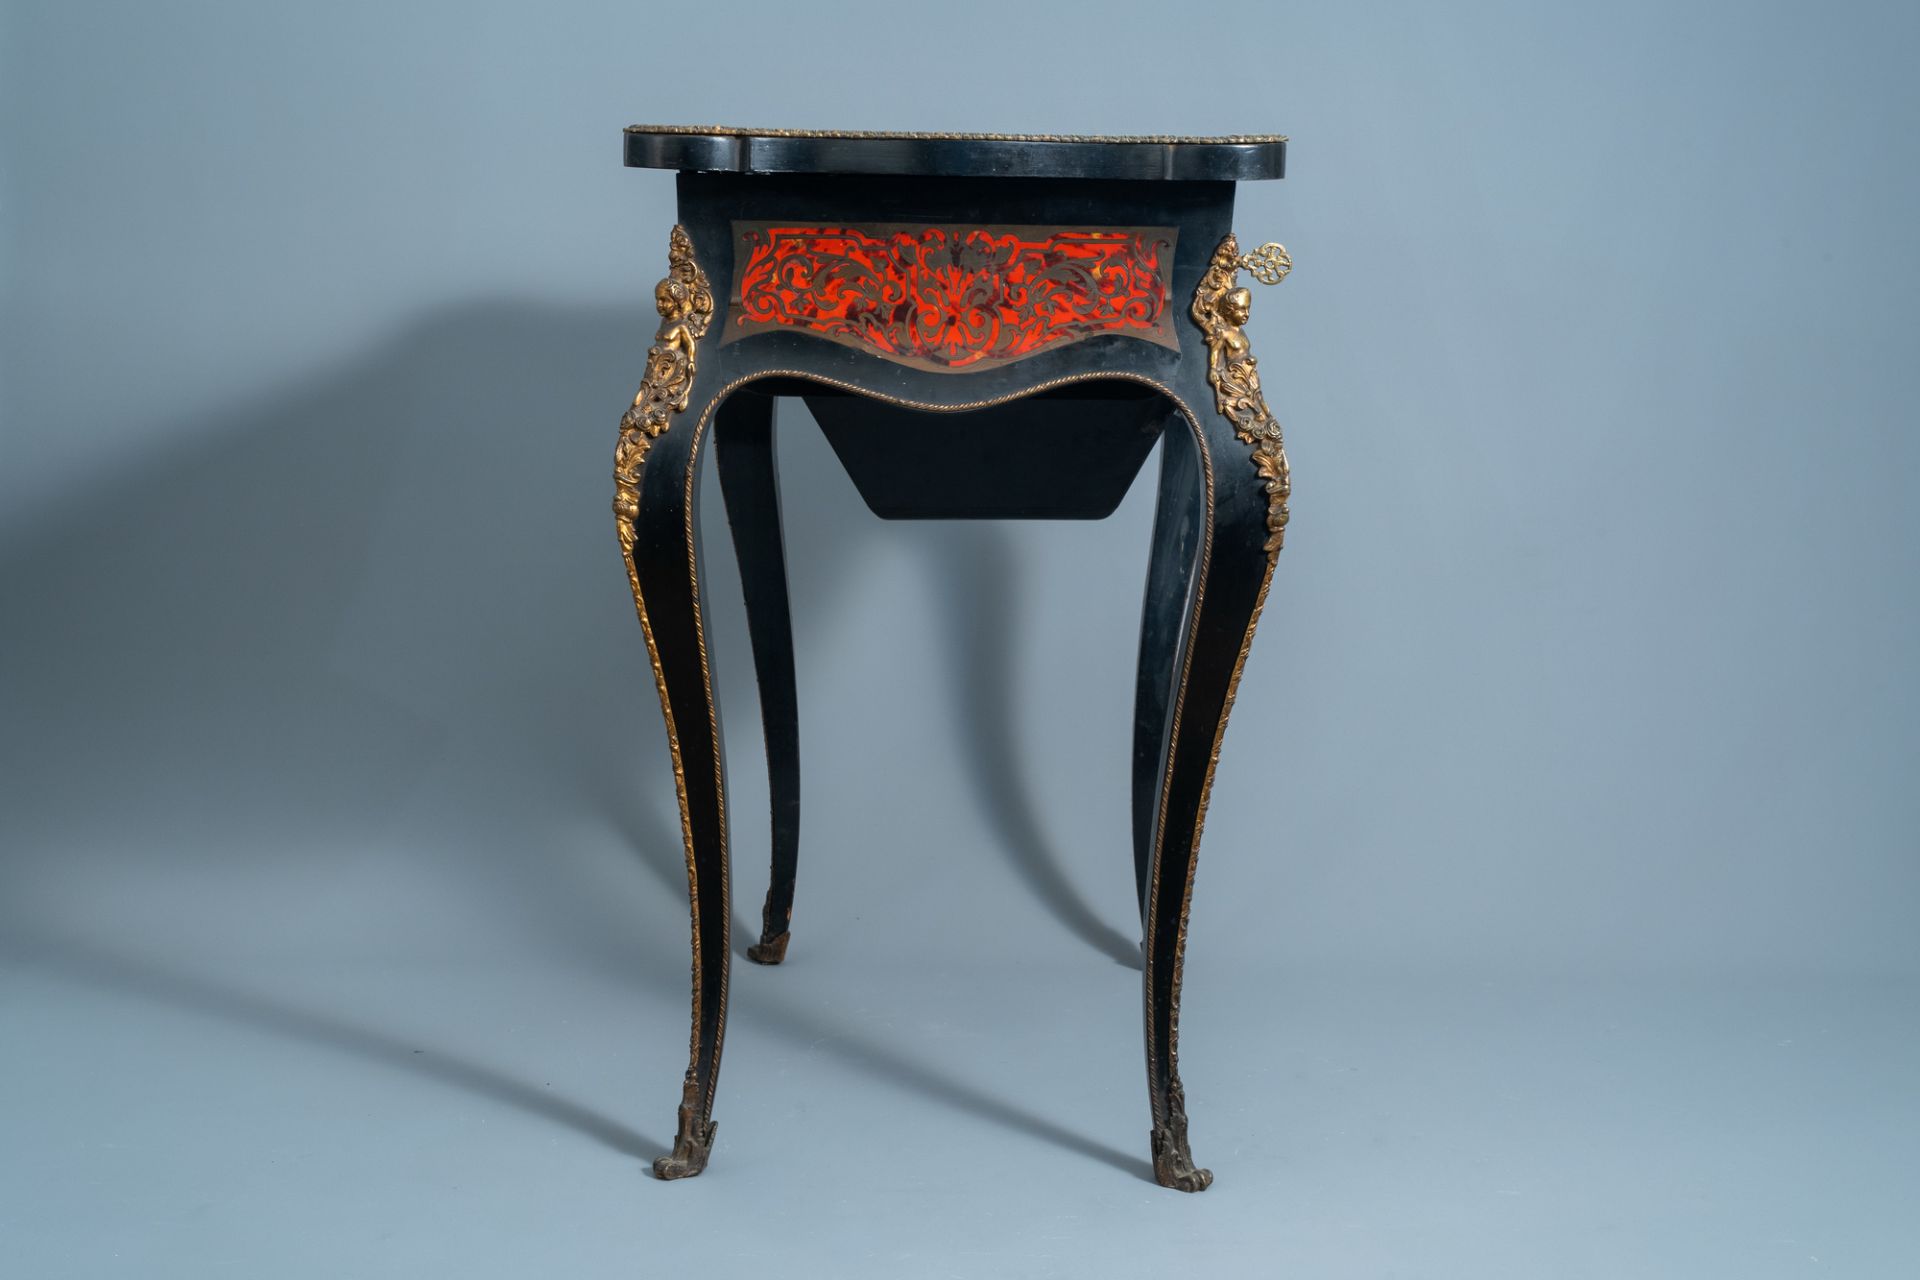 A French Historicism gilt mounted and brass marquetry sewing table, L. Grade F. - R(ue) Castex 9, 19 - Image 3 of 13